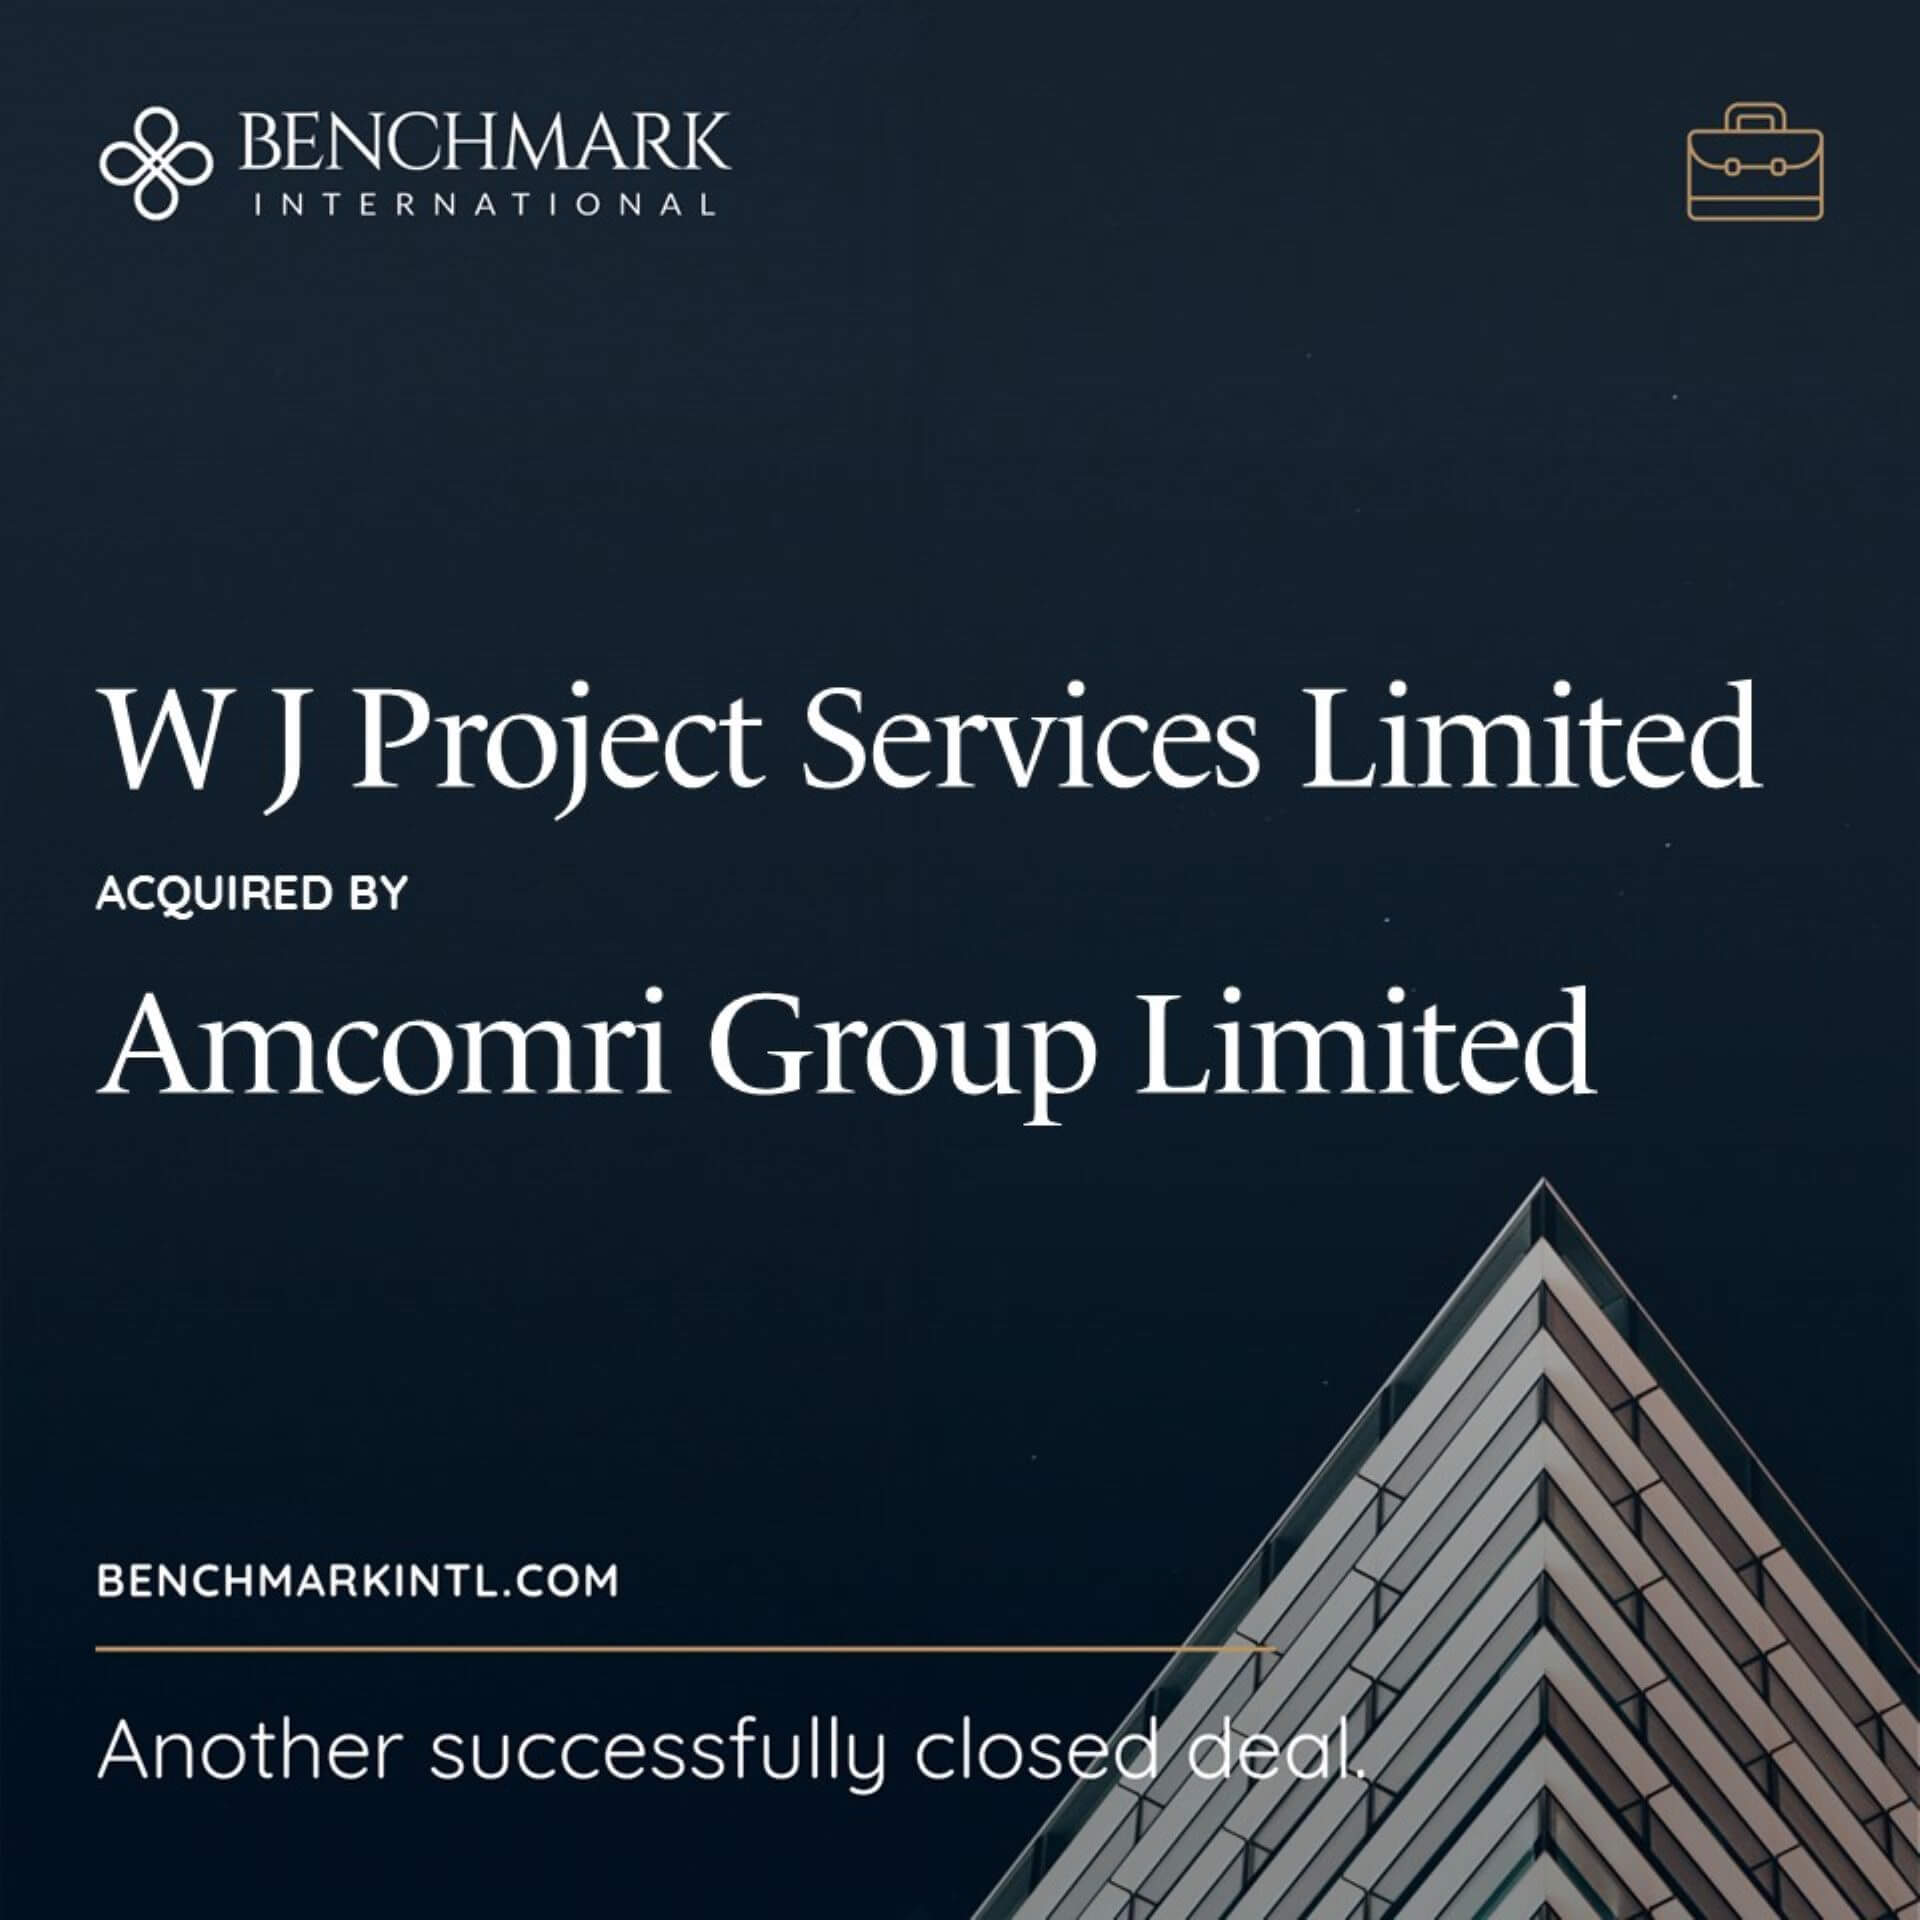 WJ Project Services acquired by Amcomri